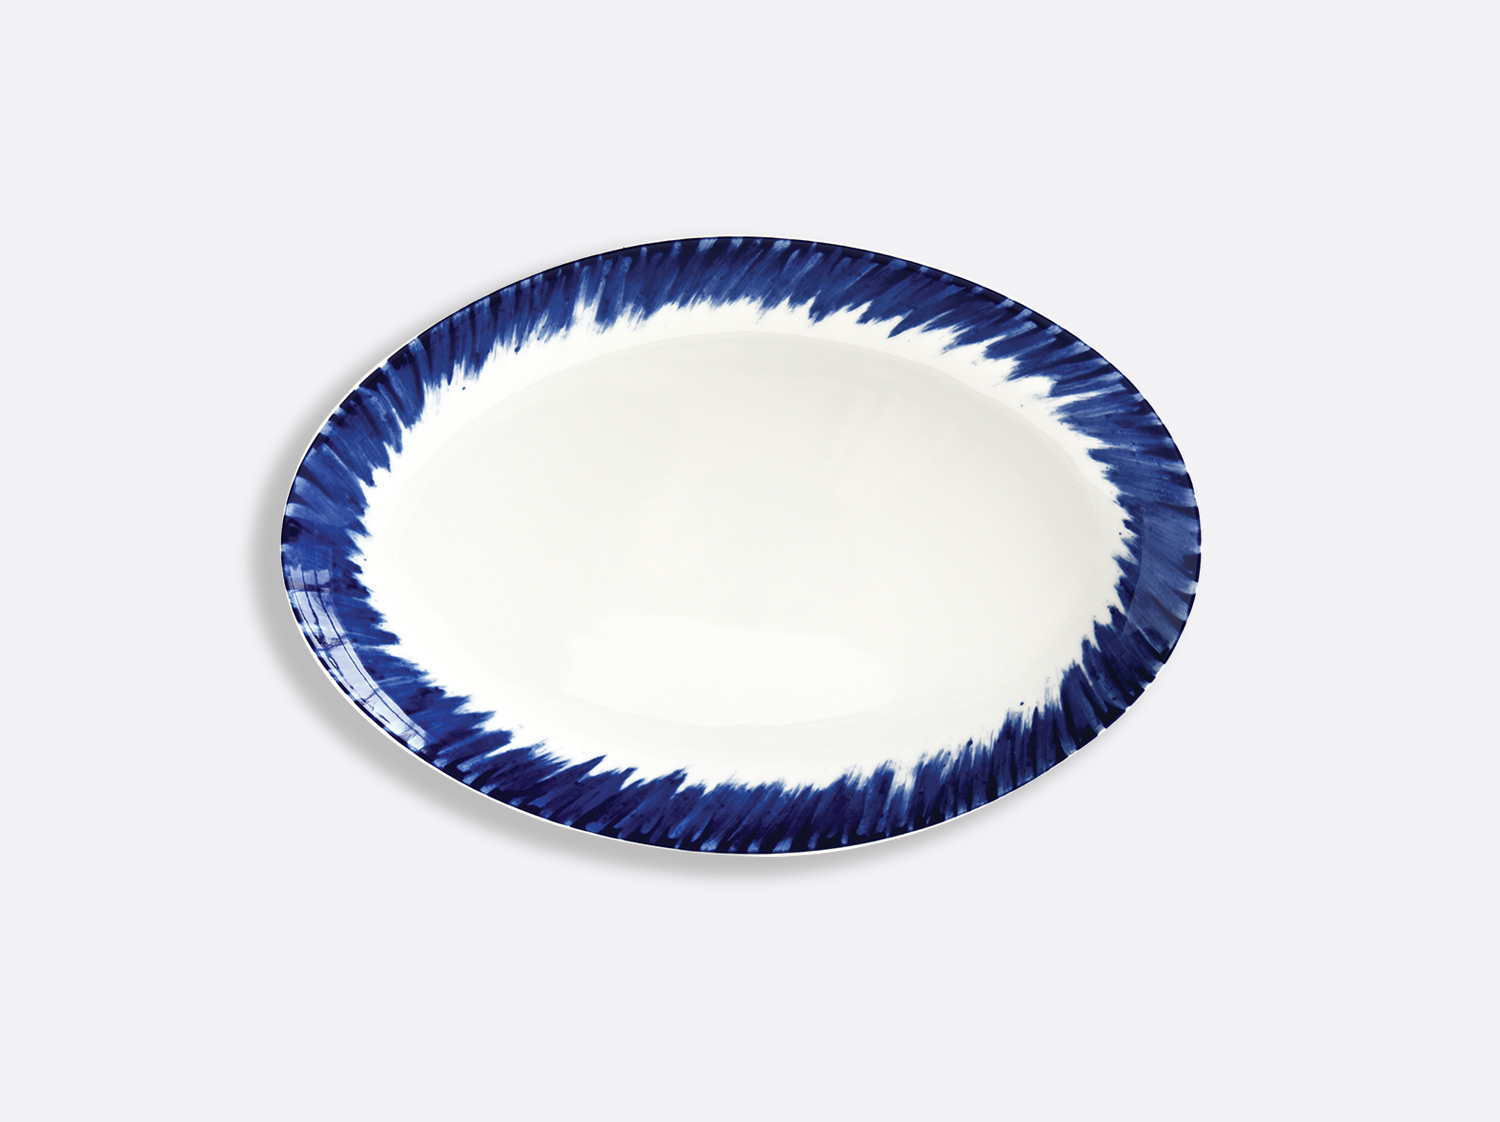 China Oval platter 13'' of the collection IN BLOOM - Zemer Peled | Bernardaud